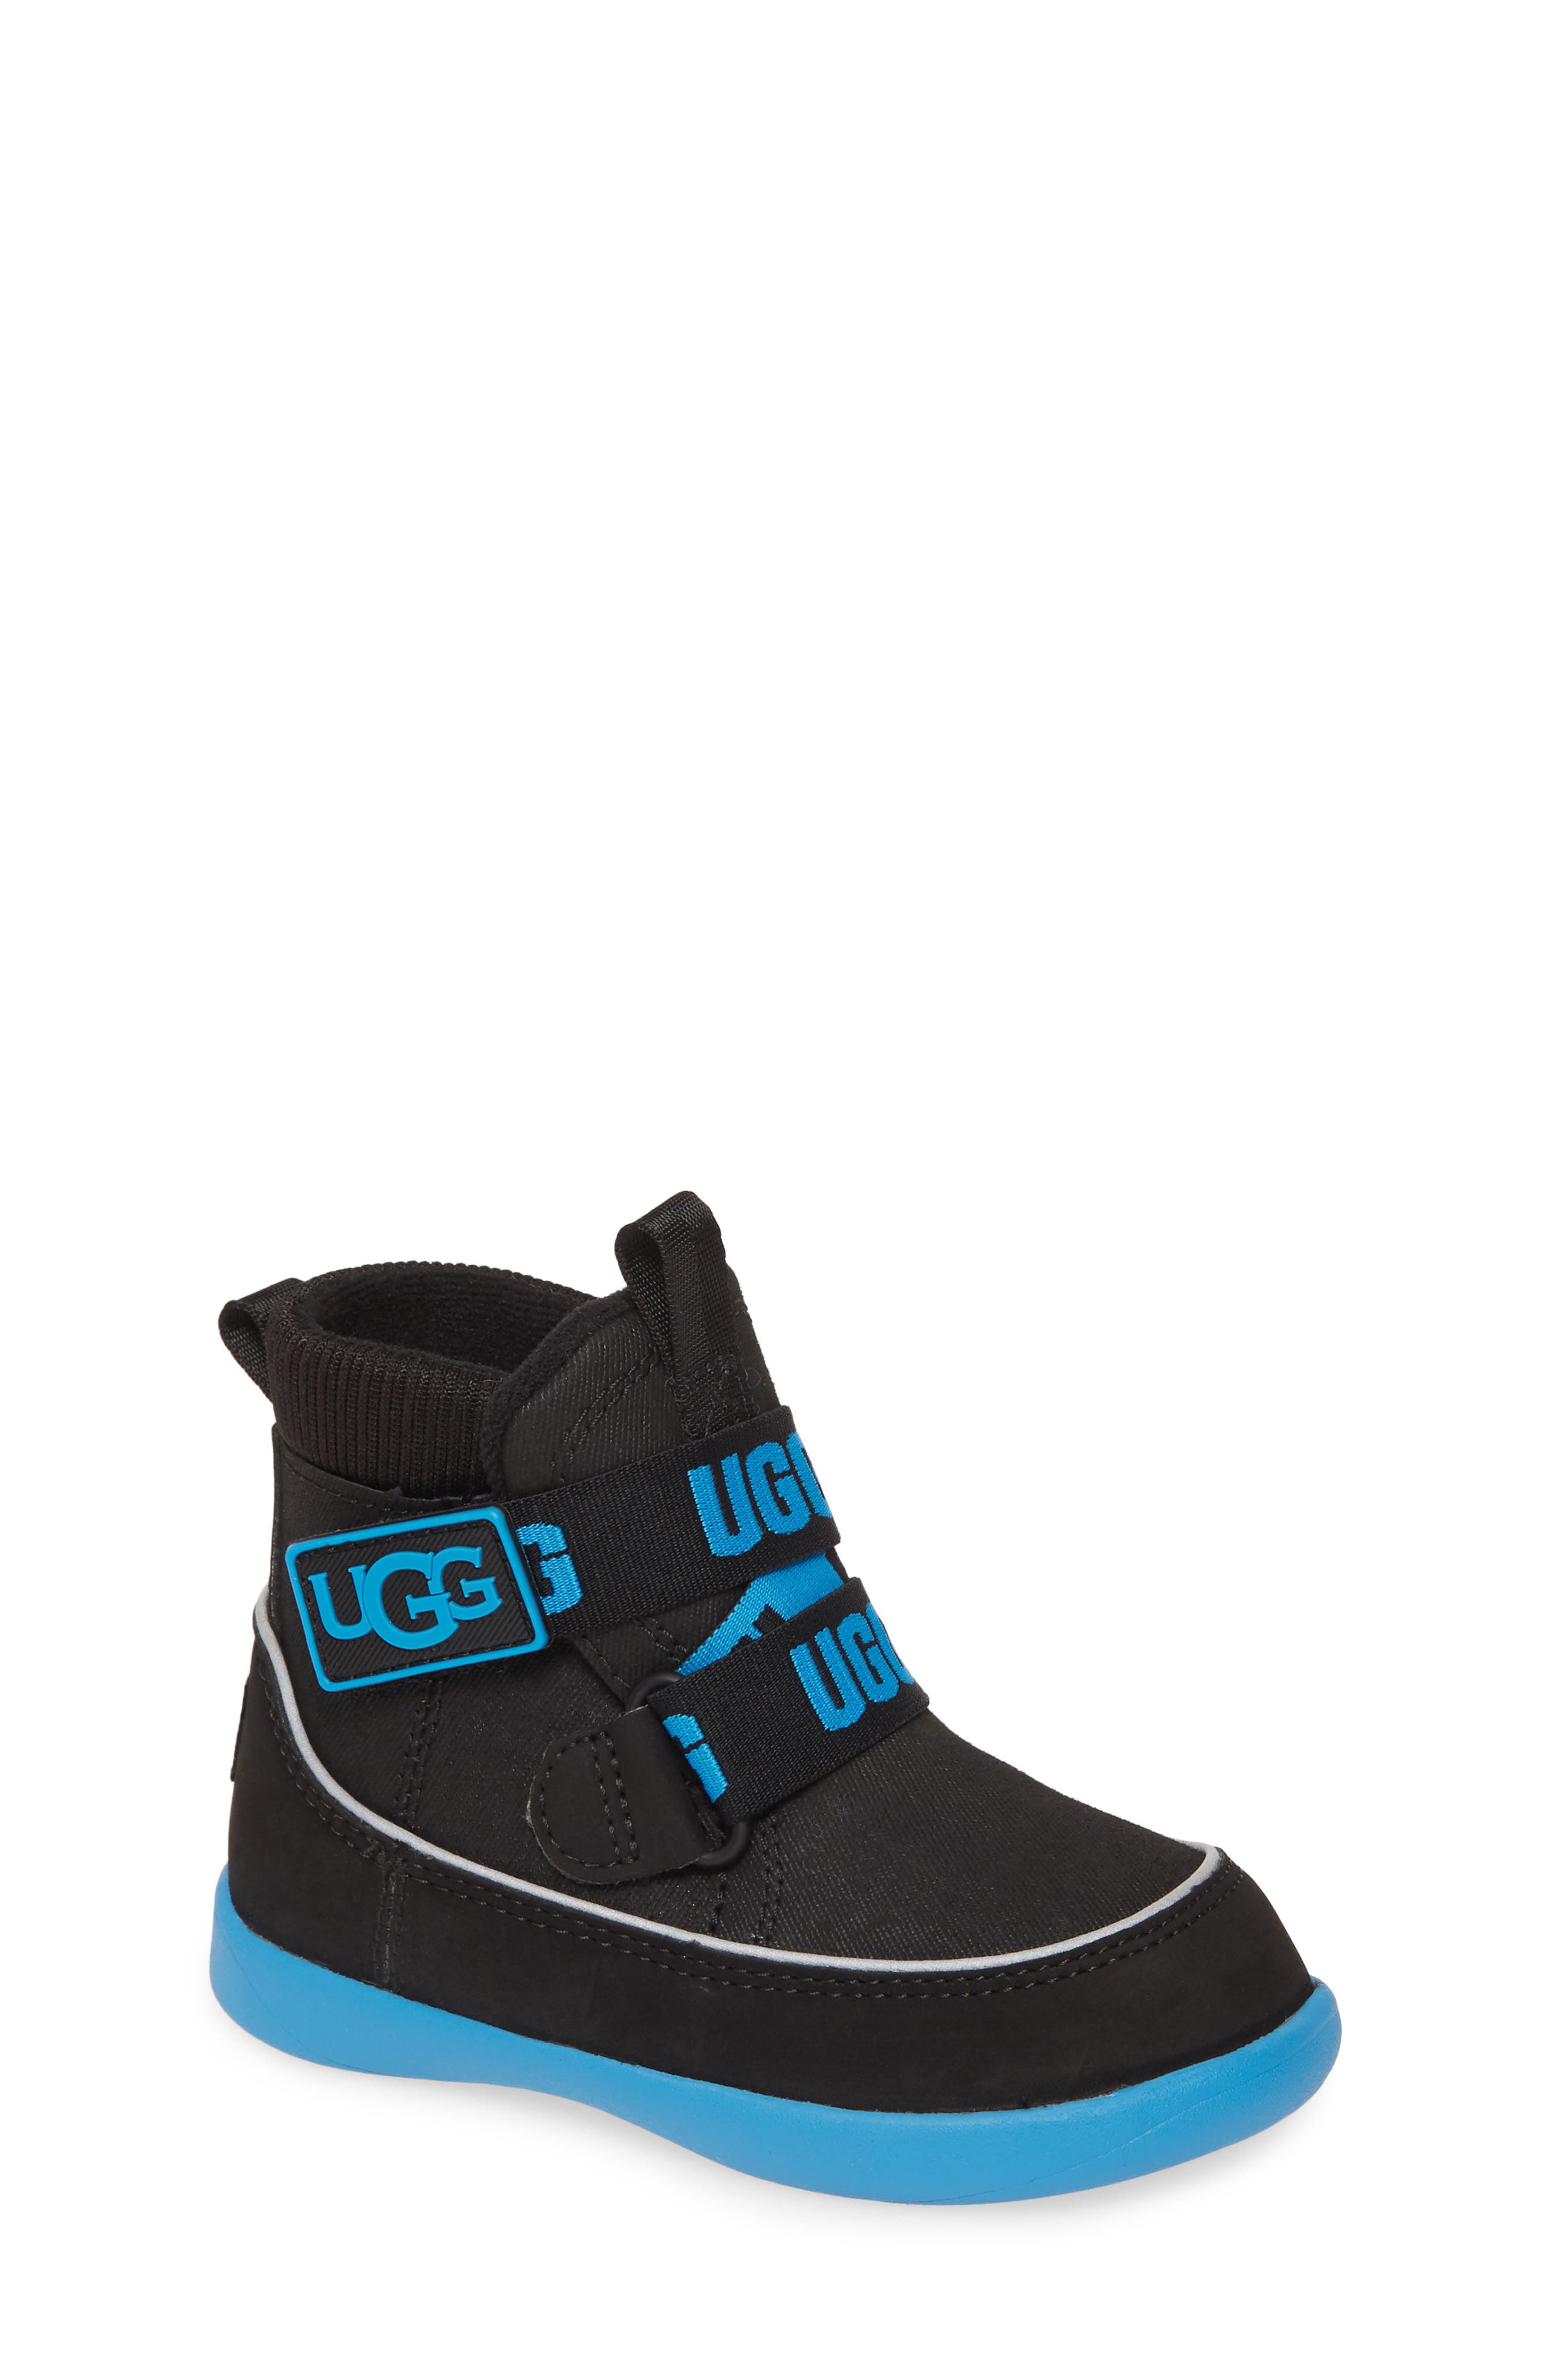 navy blue uggs for toddlers